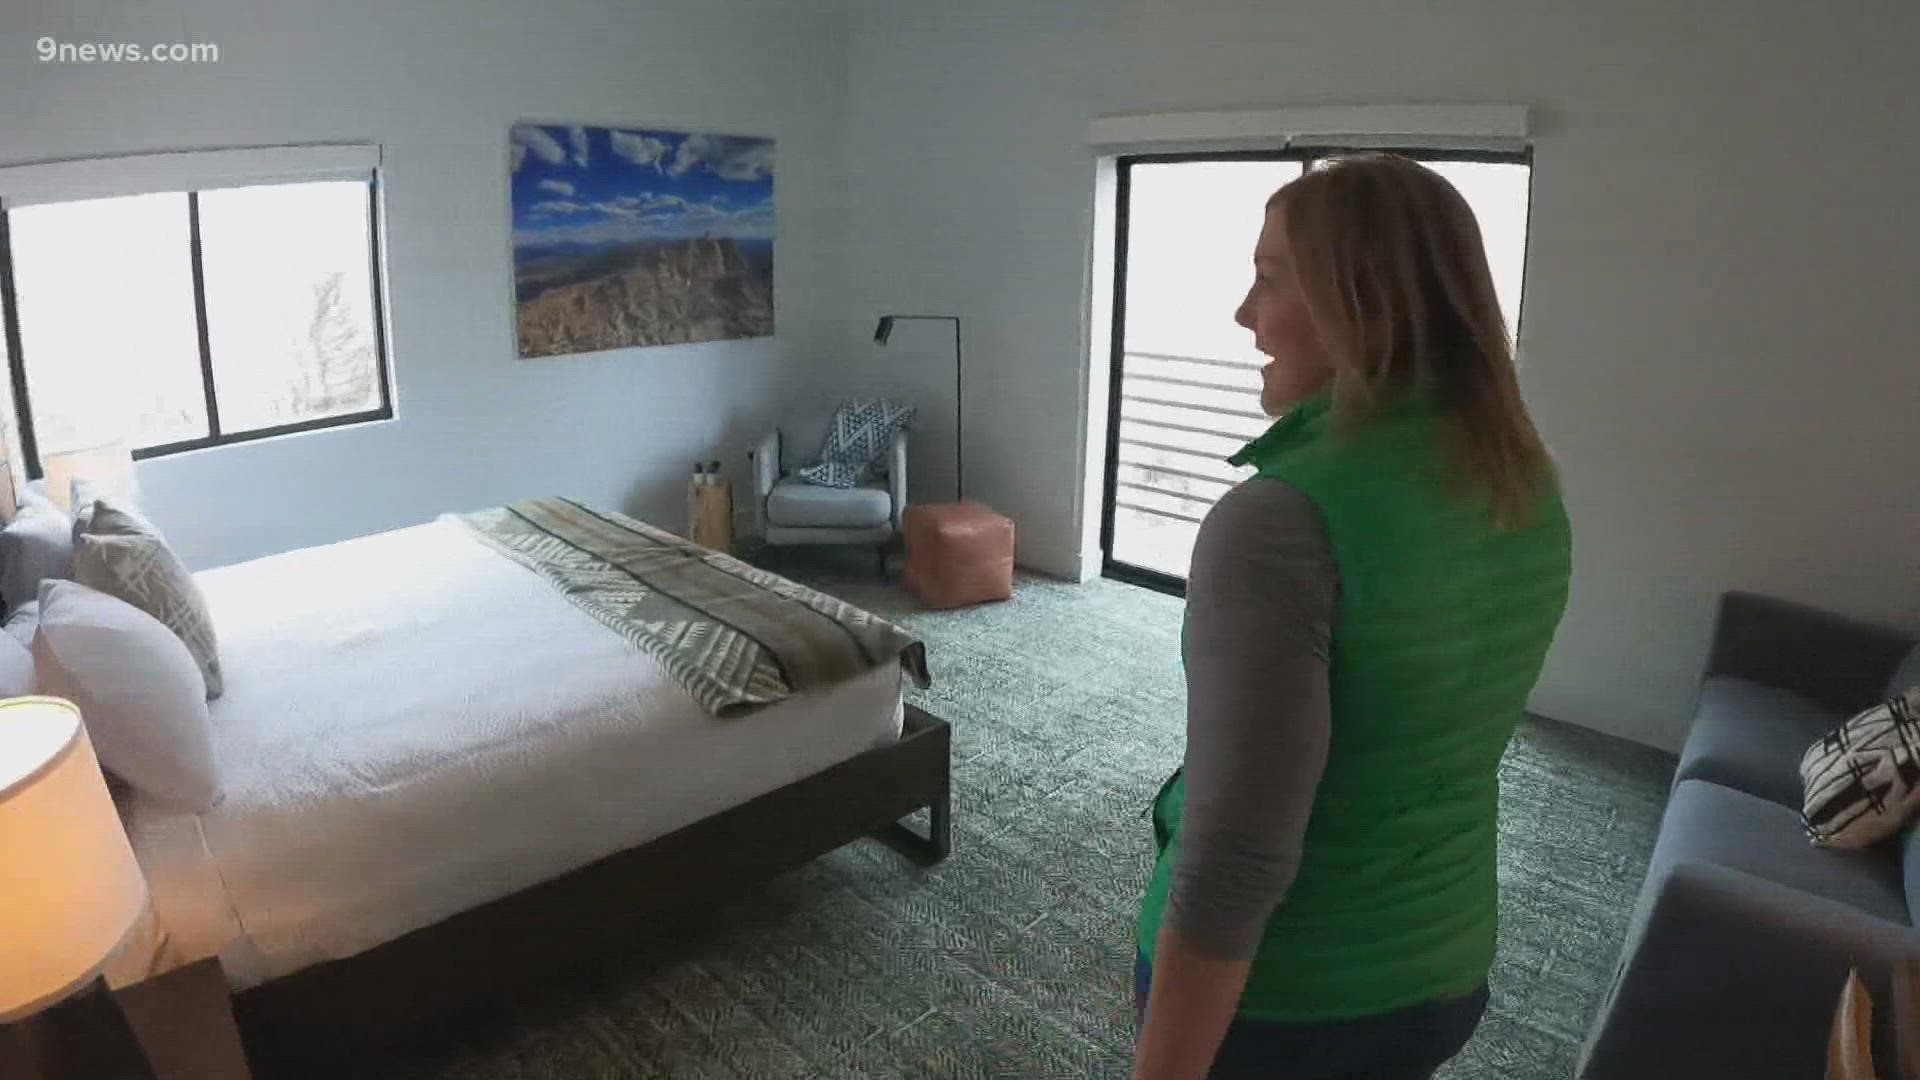 The Pad Hotel is built out of shipping containers, and is newest lodging choice for tourists in Silverthorne.